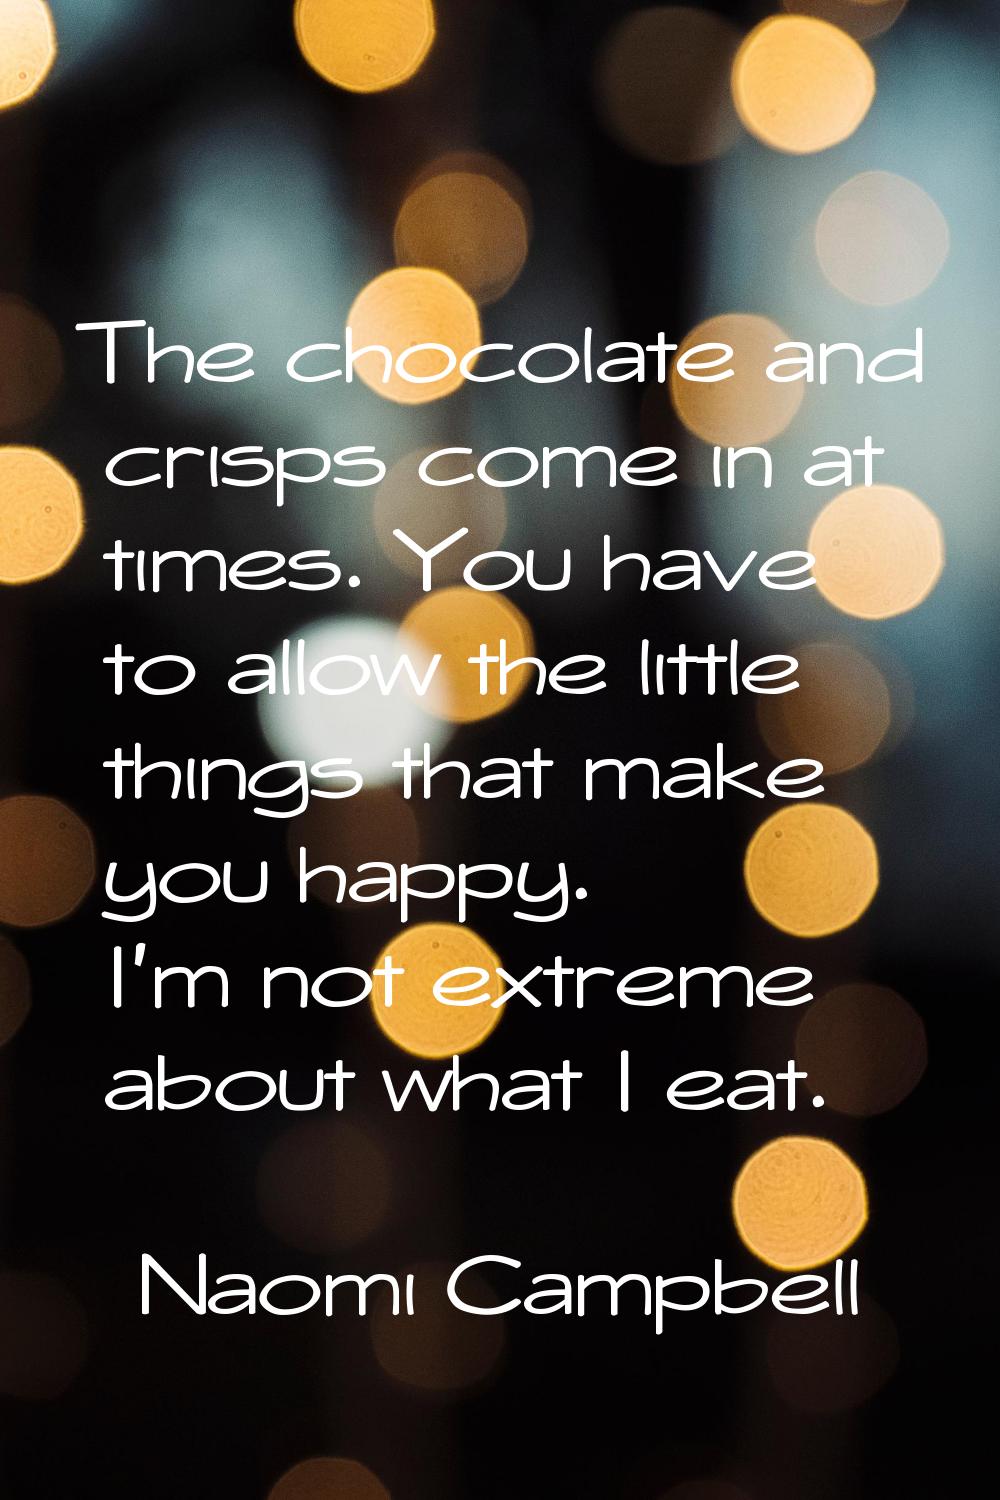 The chocolate and crisps come in at times. You have to allow the little things that make you happy.